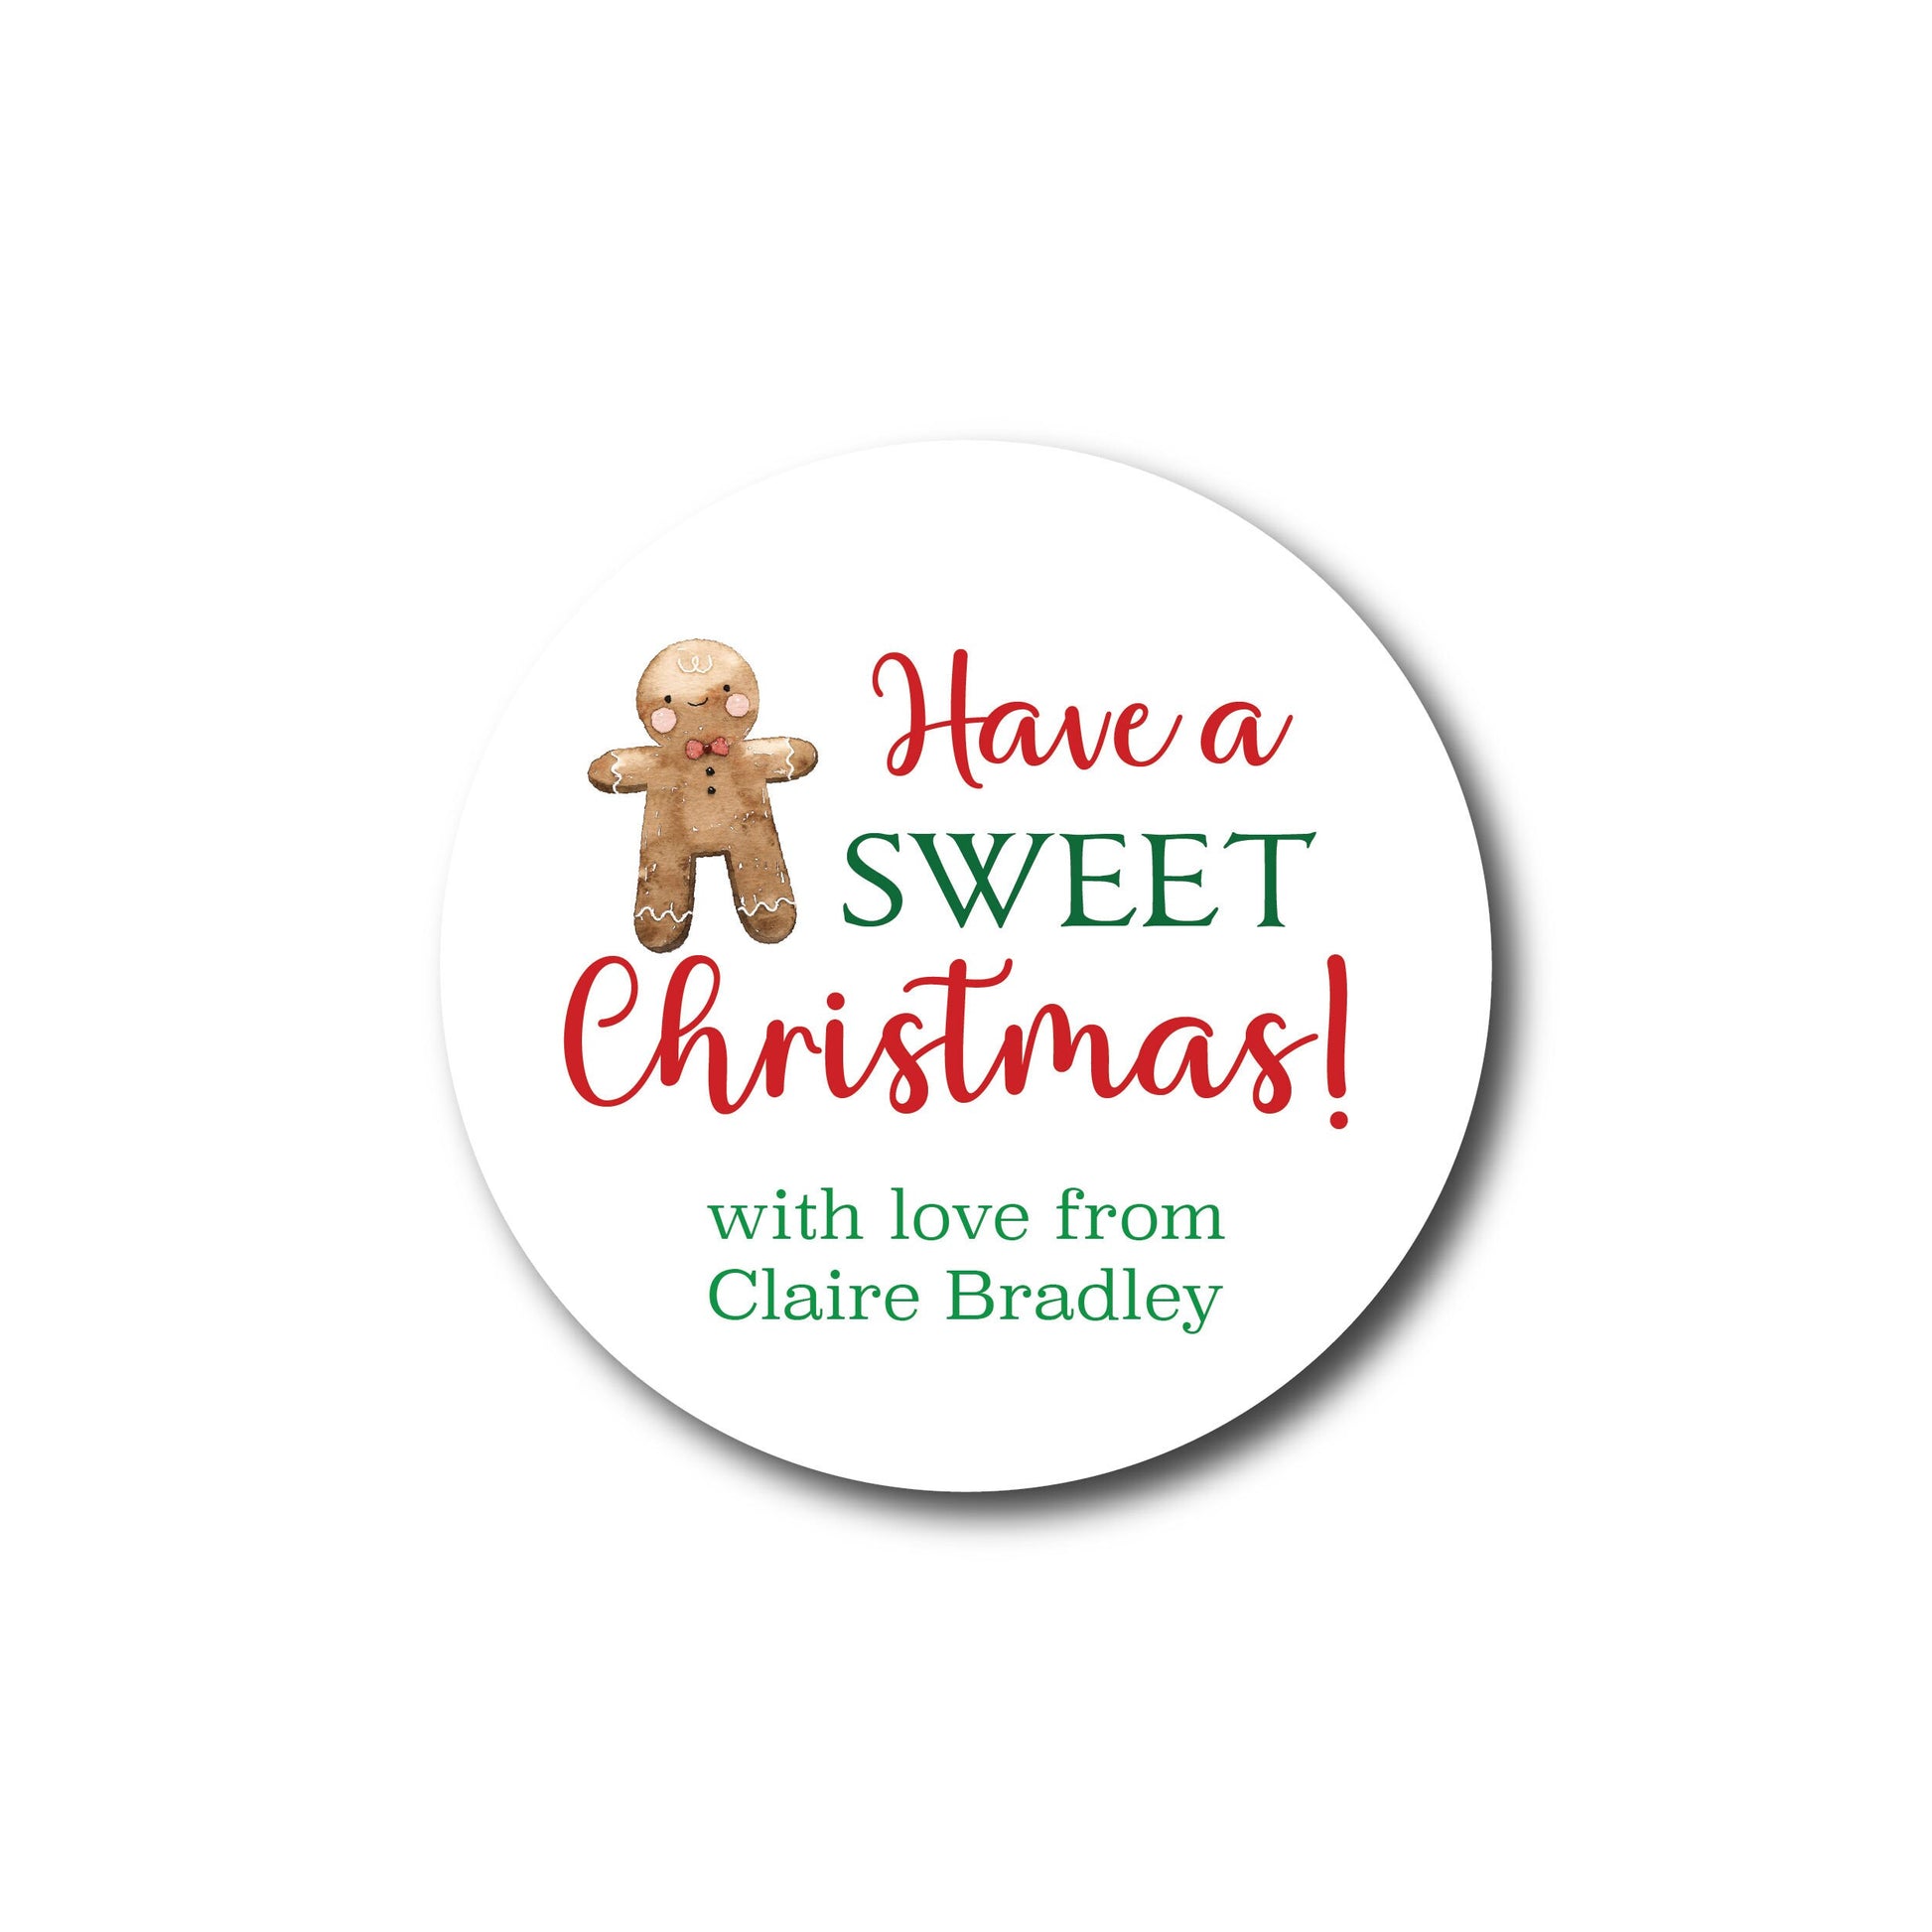 Christmas Gift Stickers, Christmas Gift Labels, Christmas Stickers, Christmas Labels, Christmas Baking, Baked Goods, Gingerbread Cookie